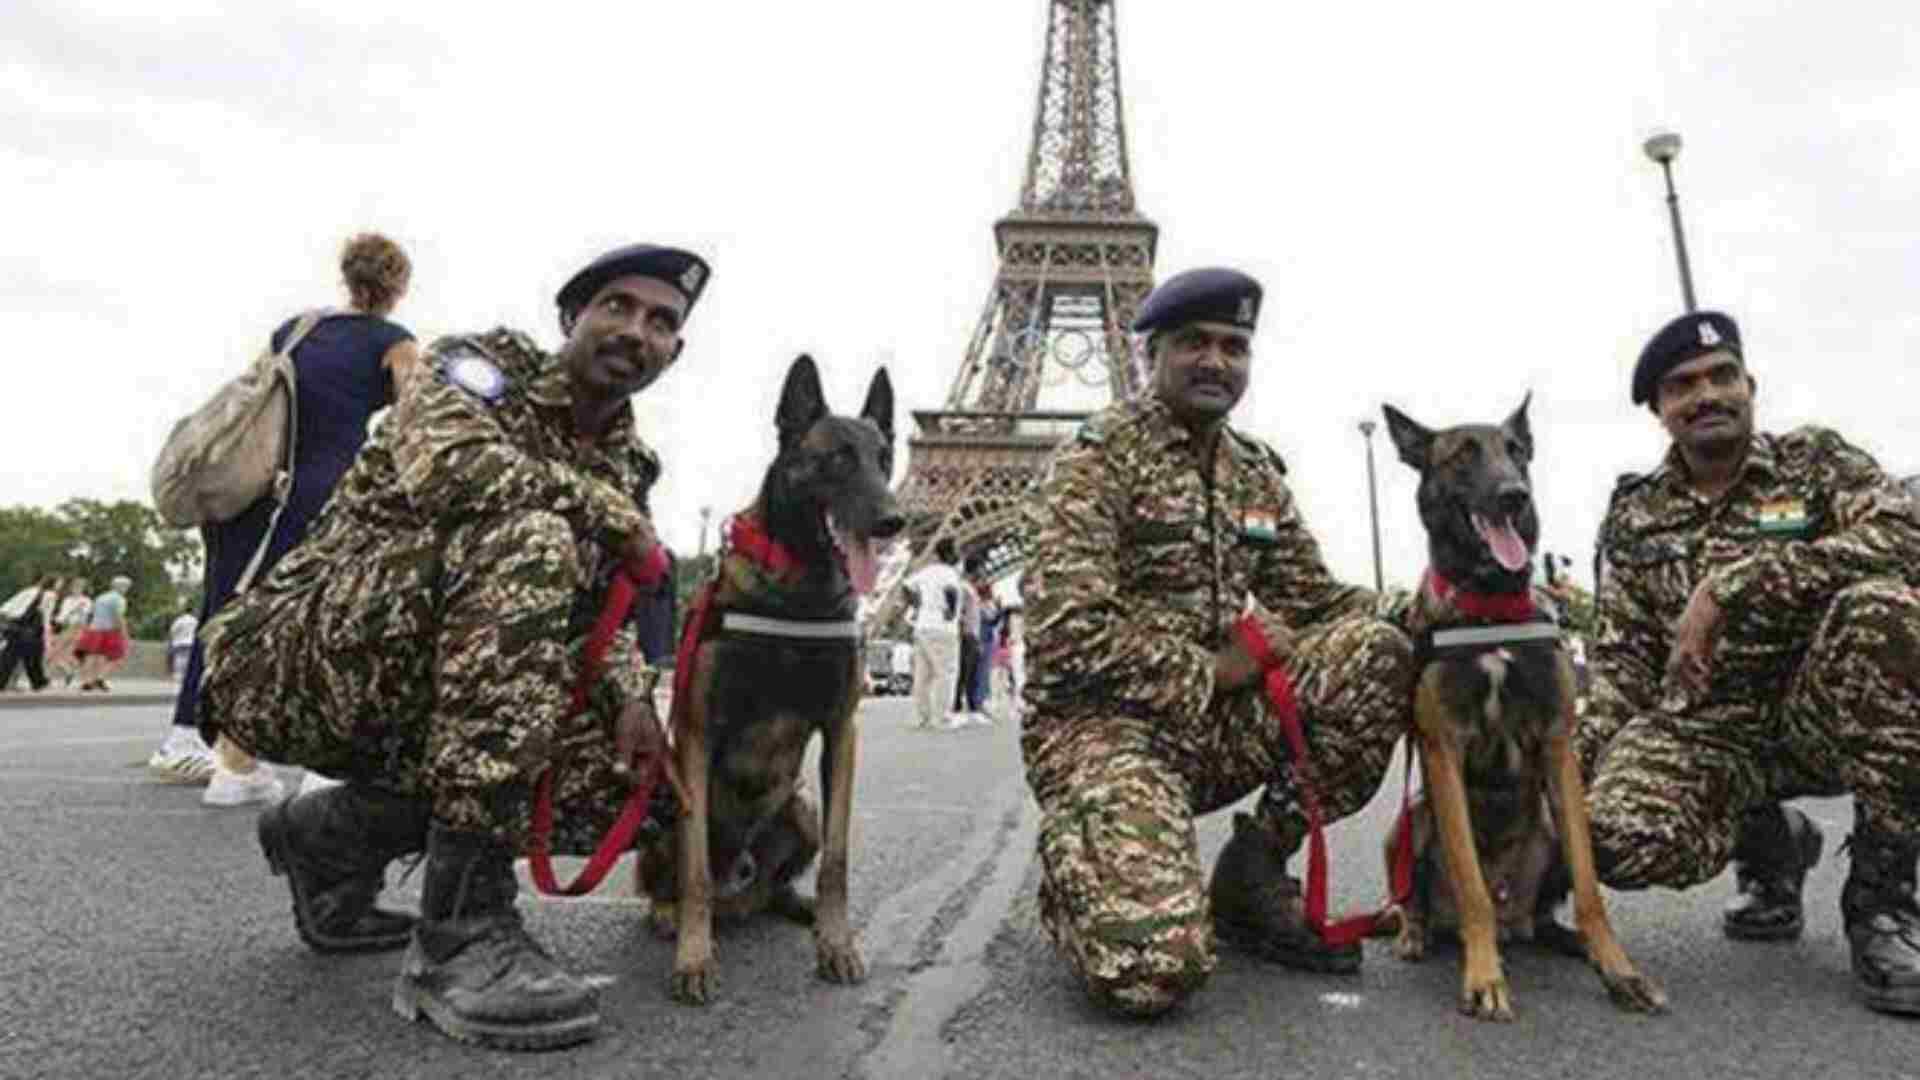 K9 Teams From India Deployed For Paris Olympics Security